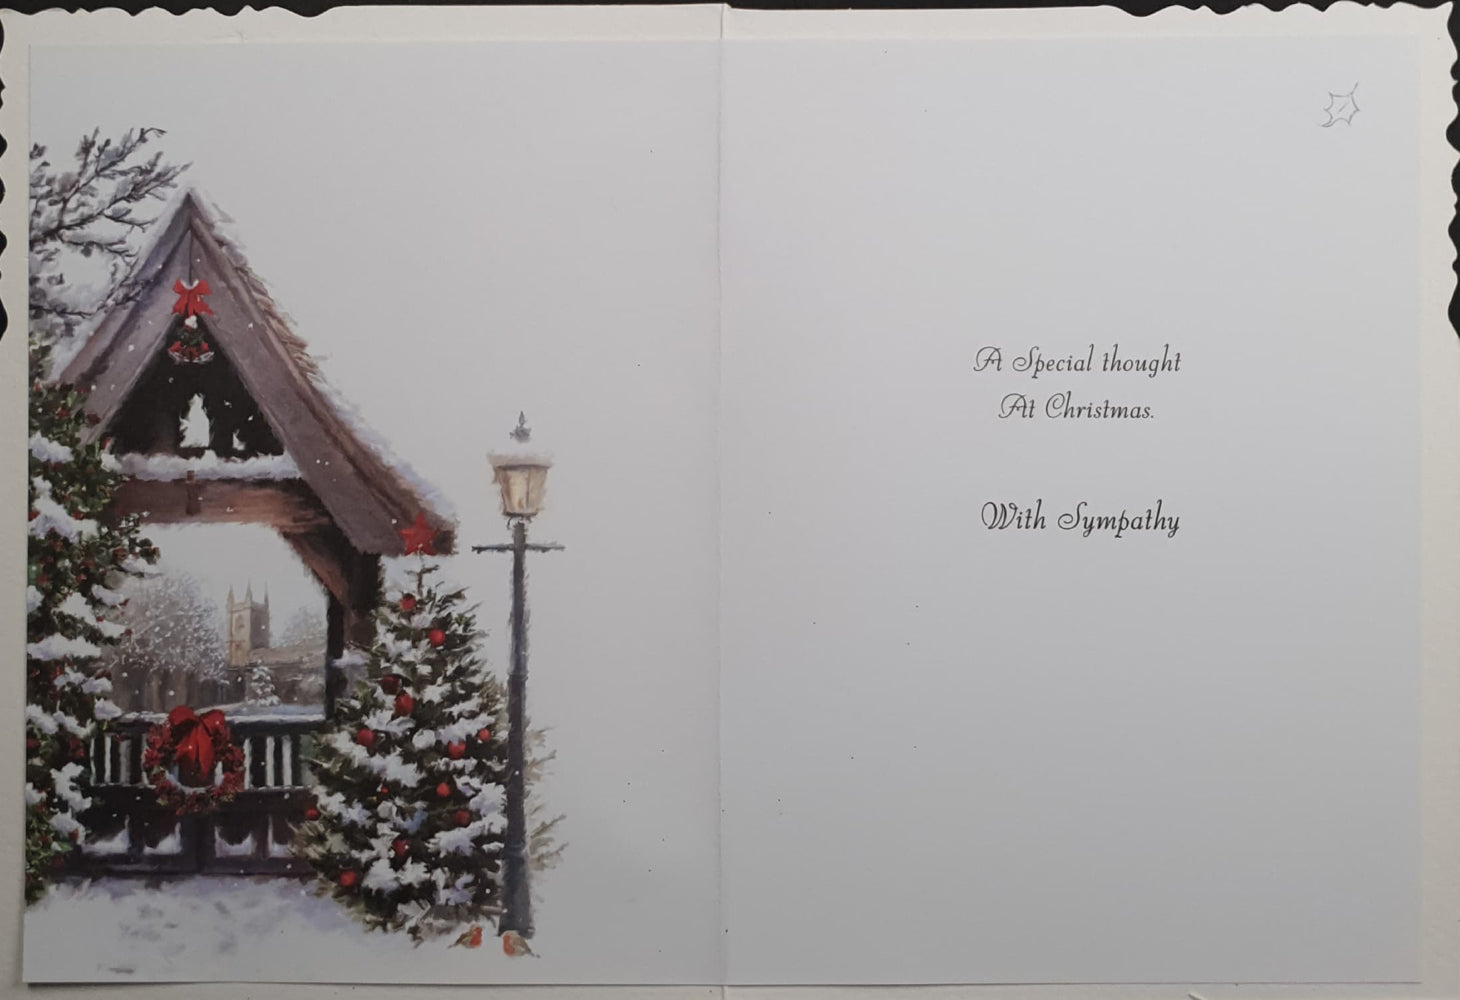 Sympathy Christmas Card - With Deepest Sympathy / Christmas Trees at Snowy Arch